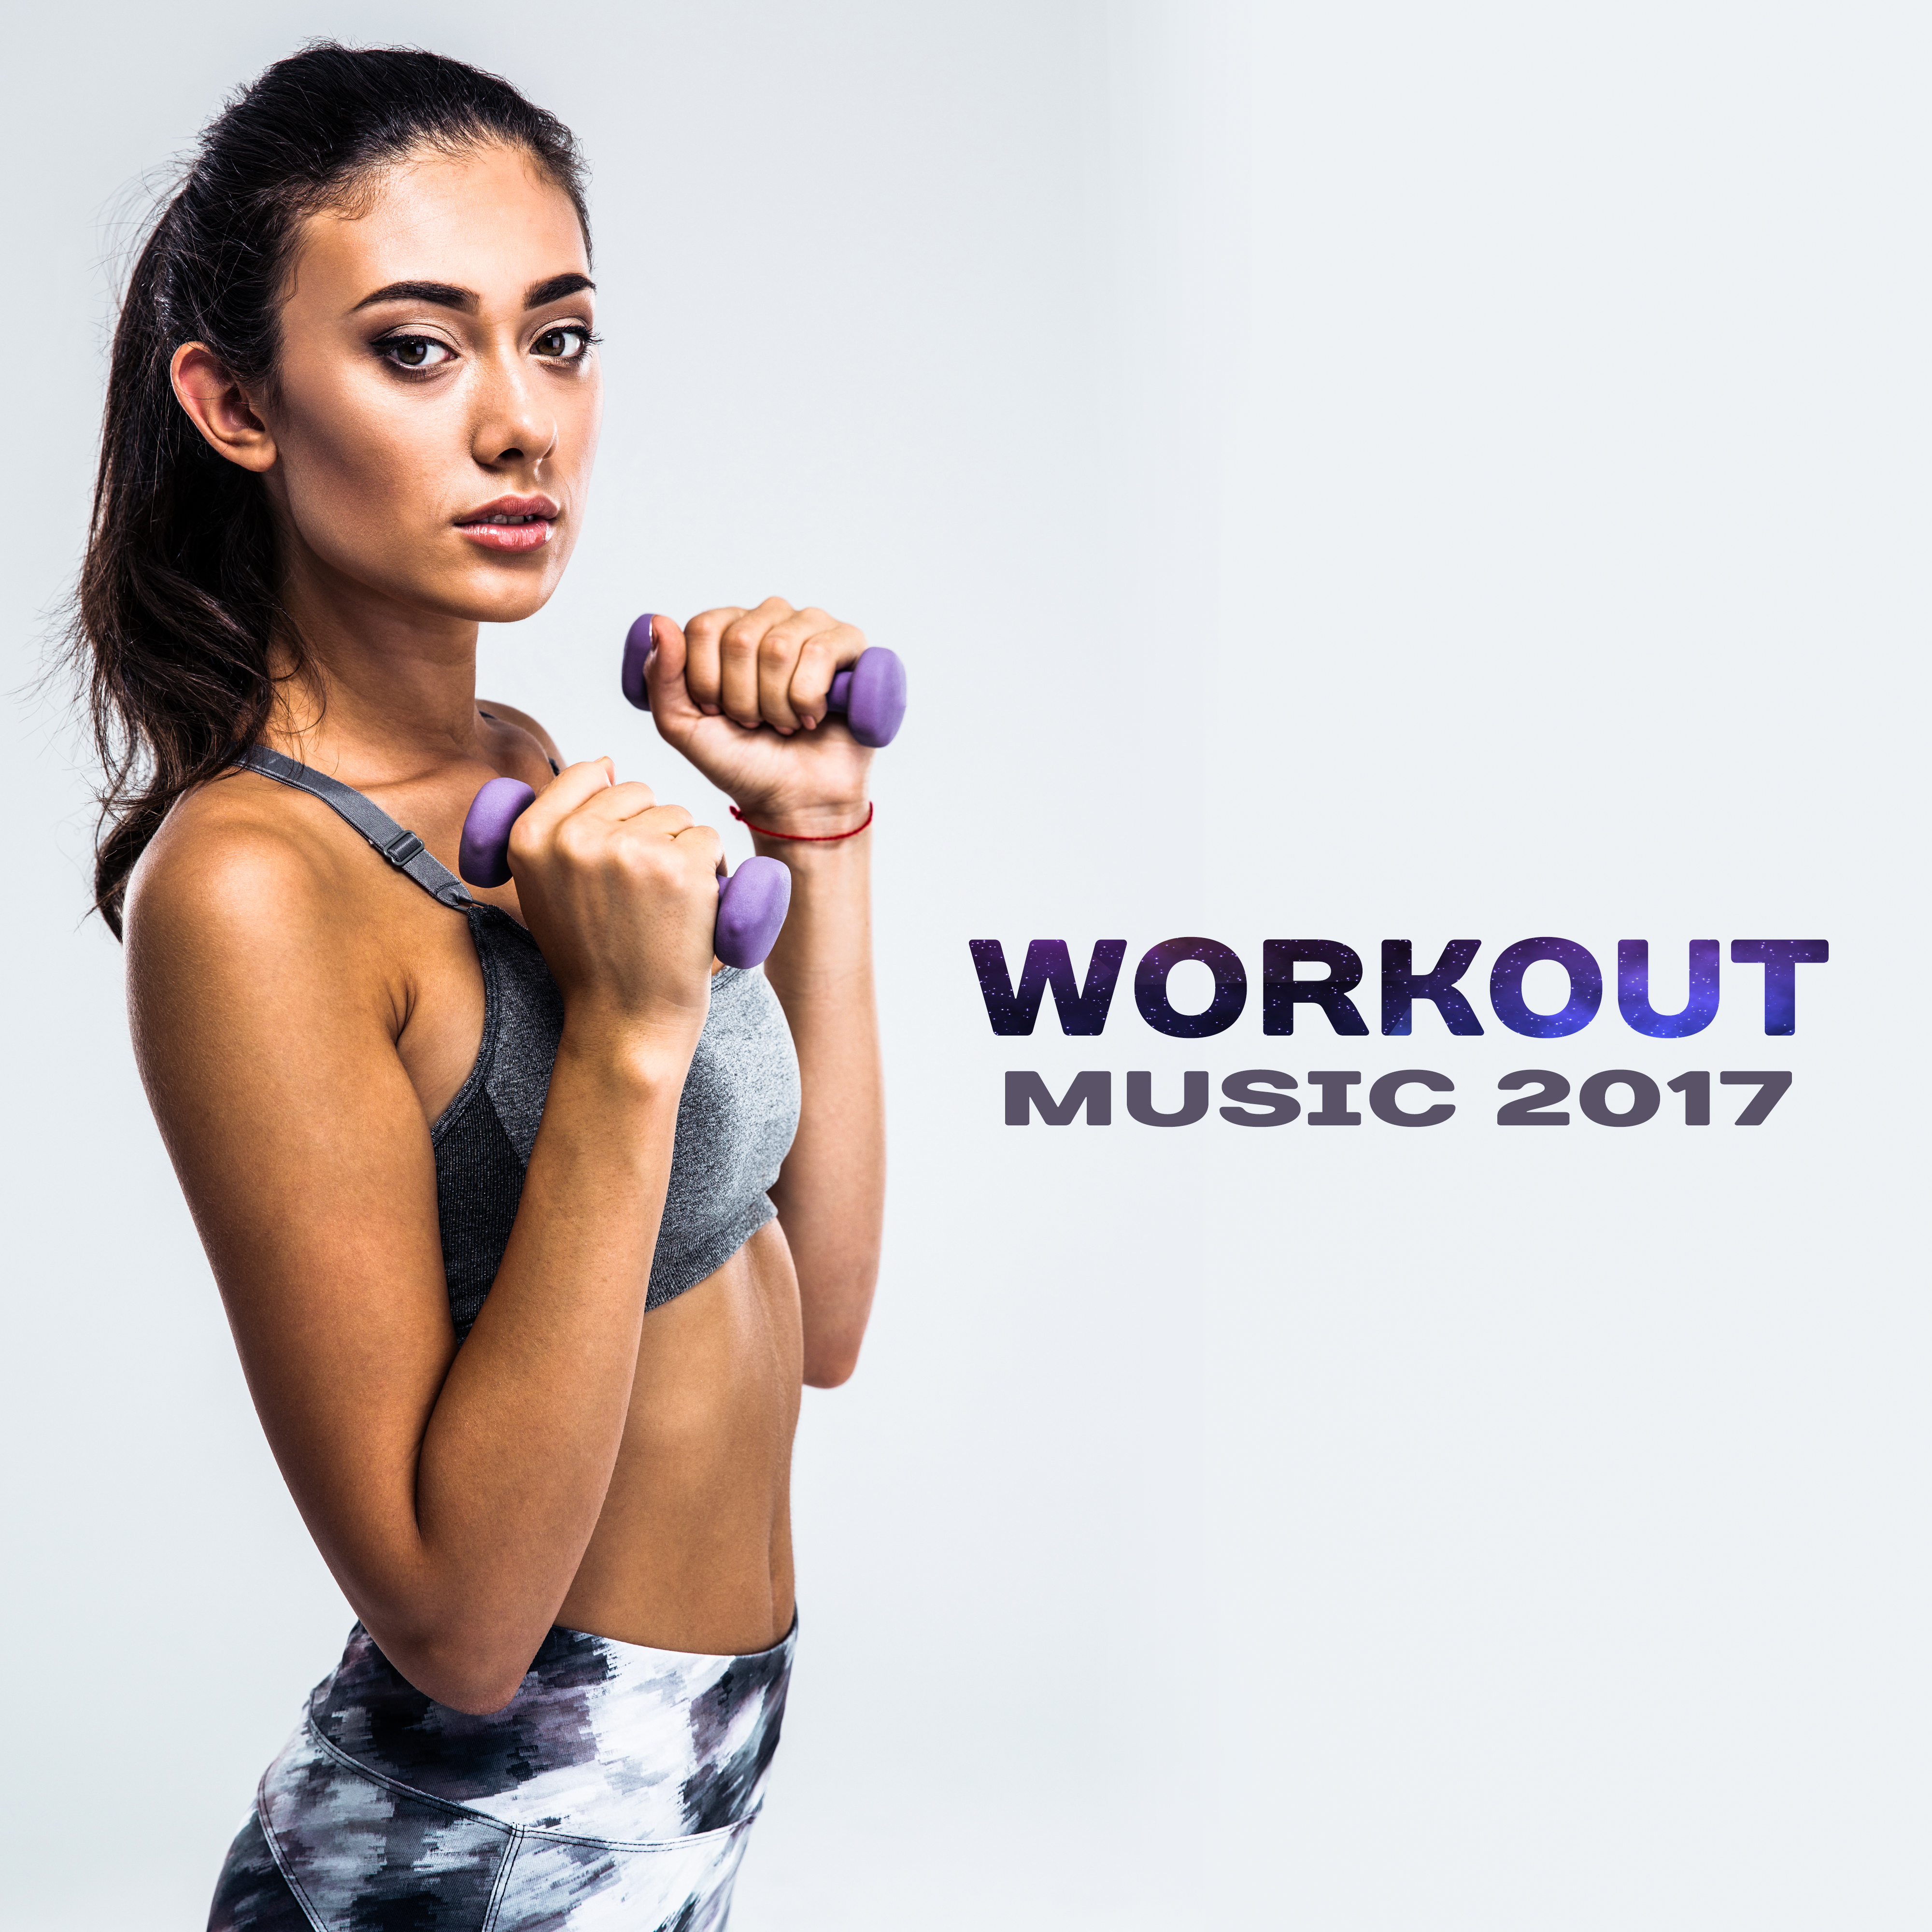 Workout Music 2017  Chill Out Music for Running, Workout, Fitness, Training, Deep Beats, Chill Out 2017